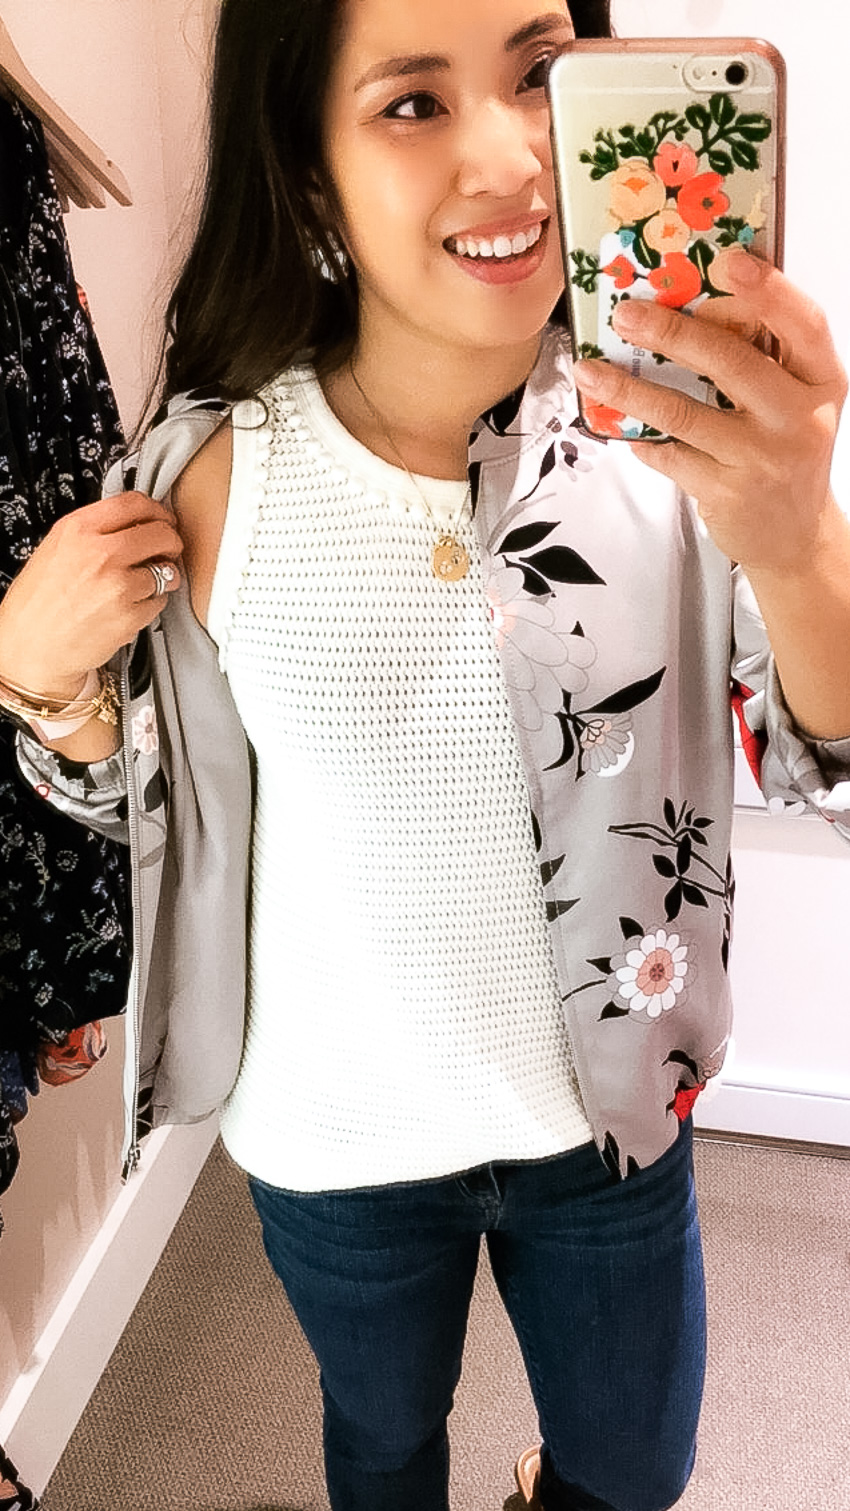 LOFT Sale: Dressing Room Diaries by Dallas fashion blogger cute and little | pom pom sweater tank | loft dressing room review